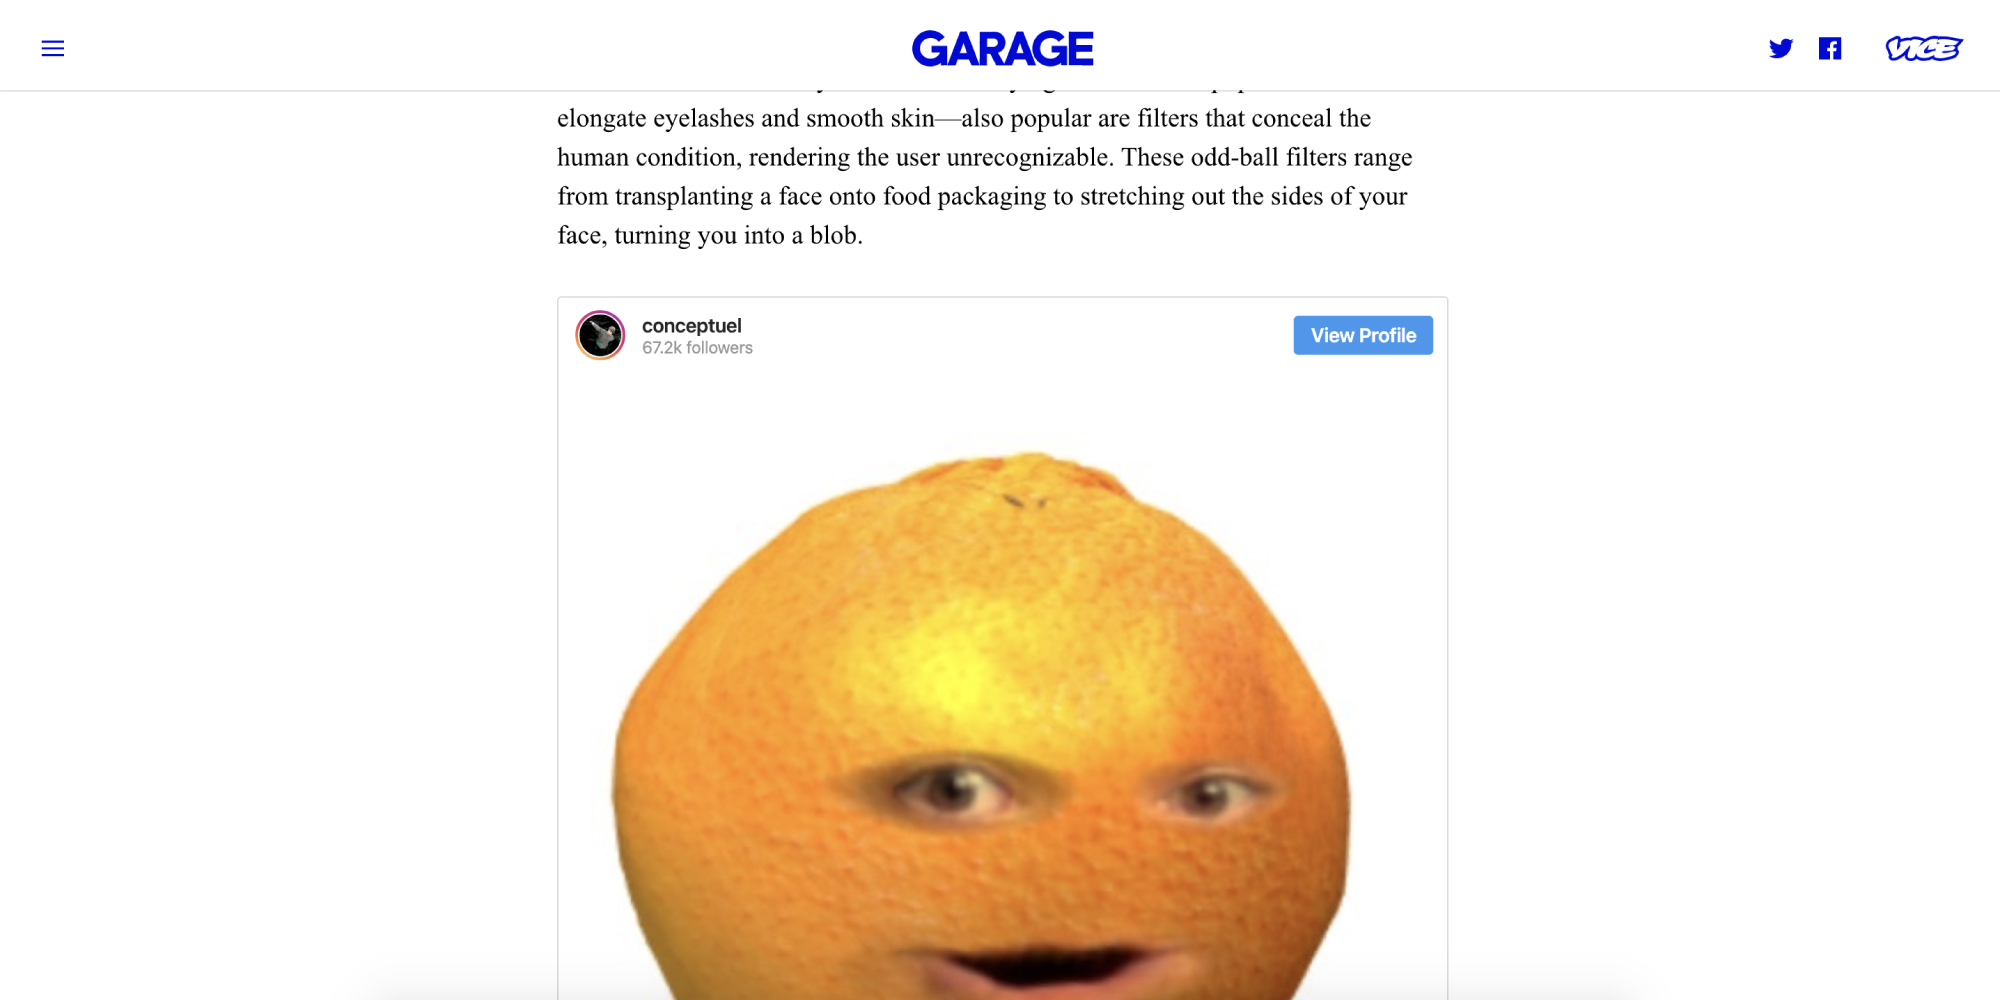 Article of GARAGE Magazine about the future of human condition containing an interview of Robbie Conceptuel with an Orange filter image